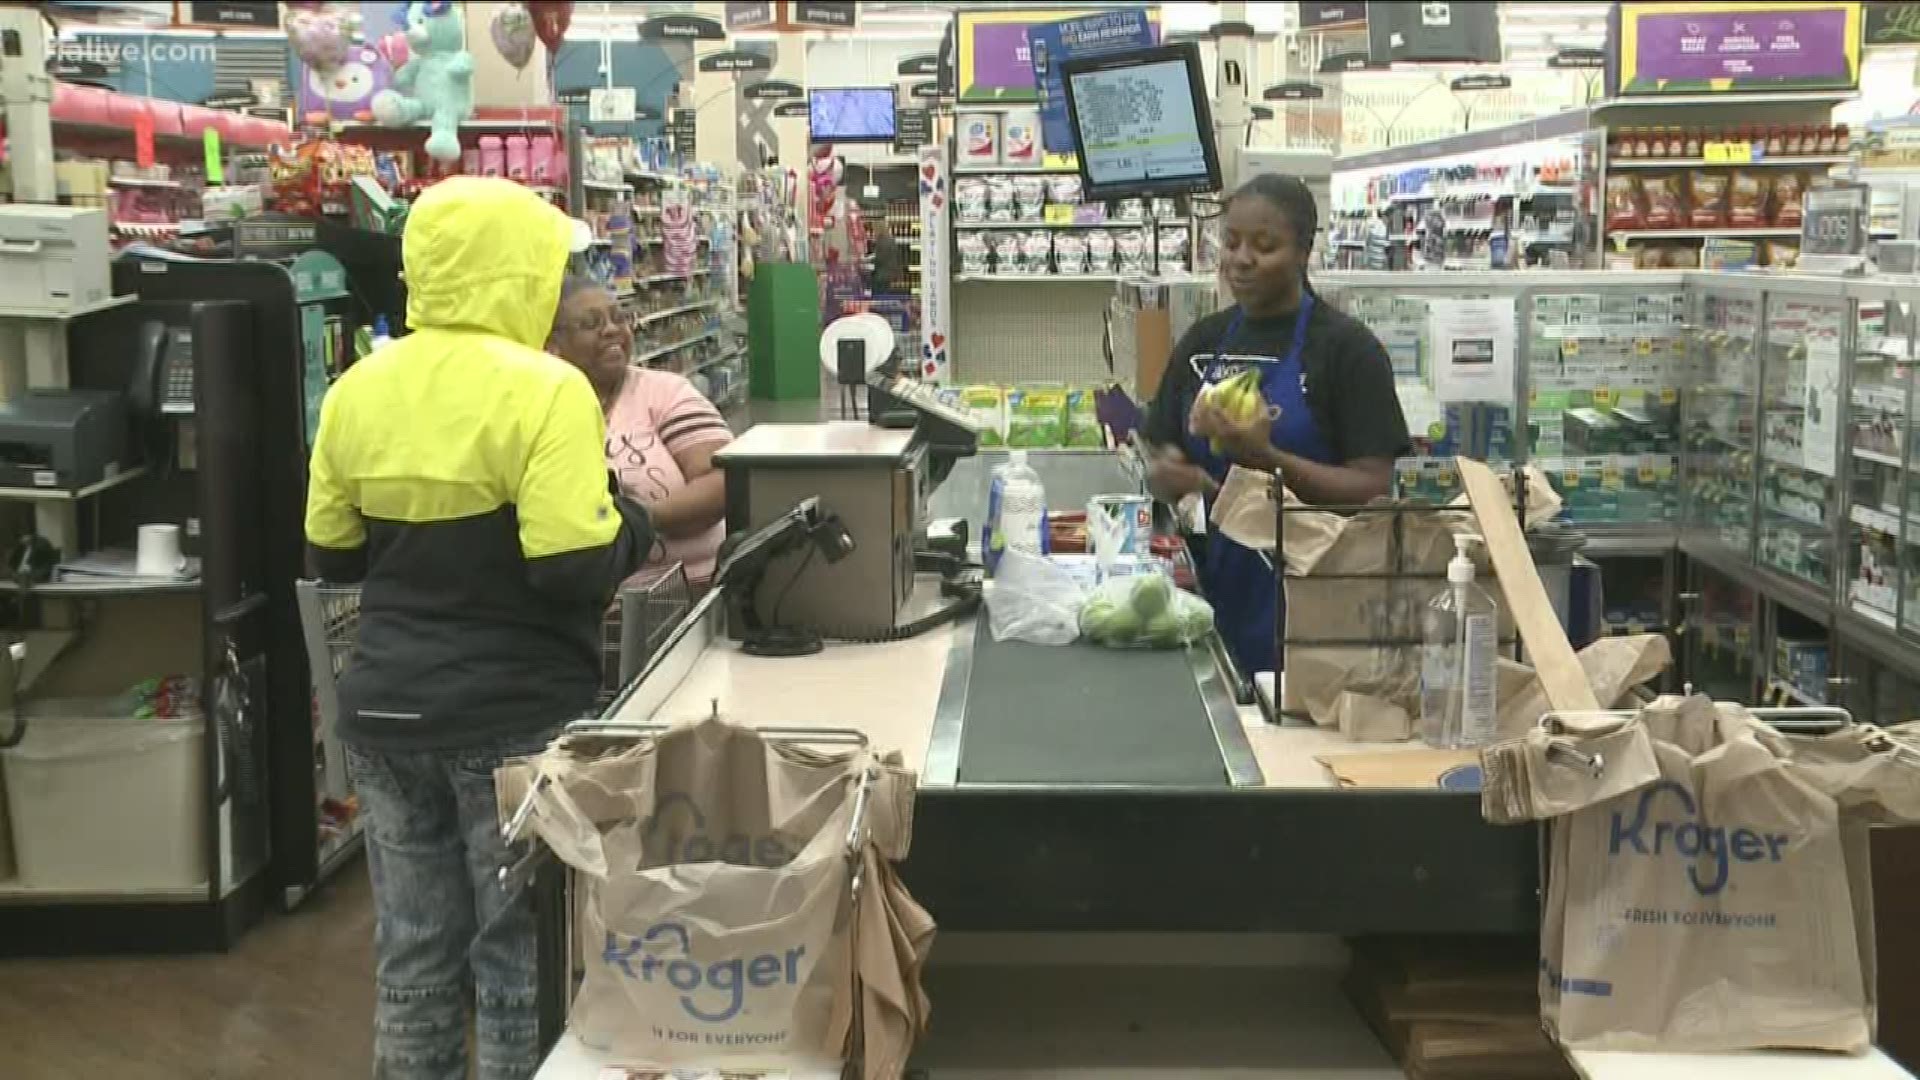 Kroger said they will voluntarily transition out of plastic bags by 2025.